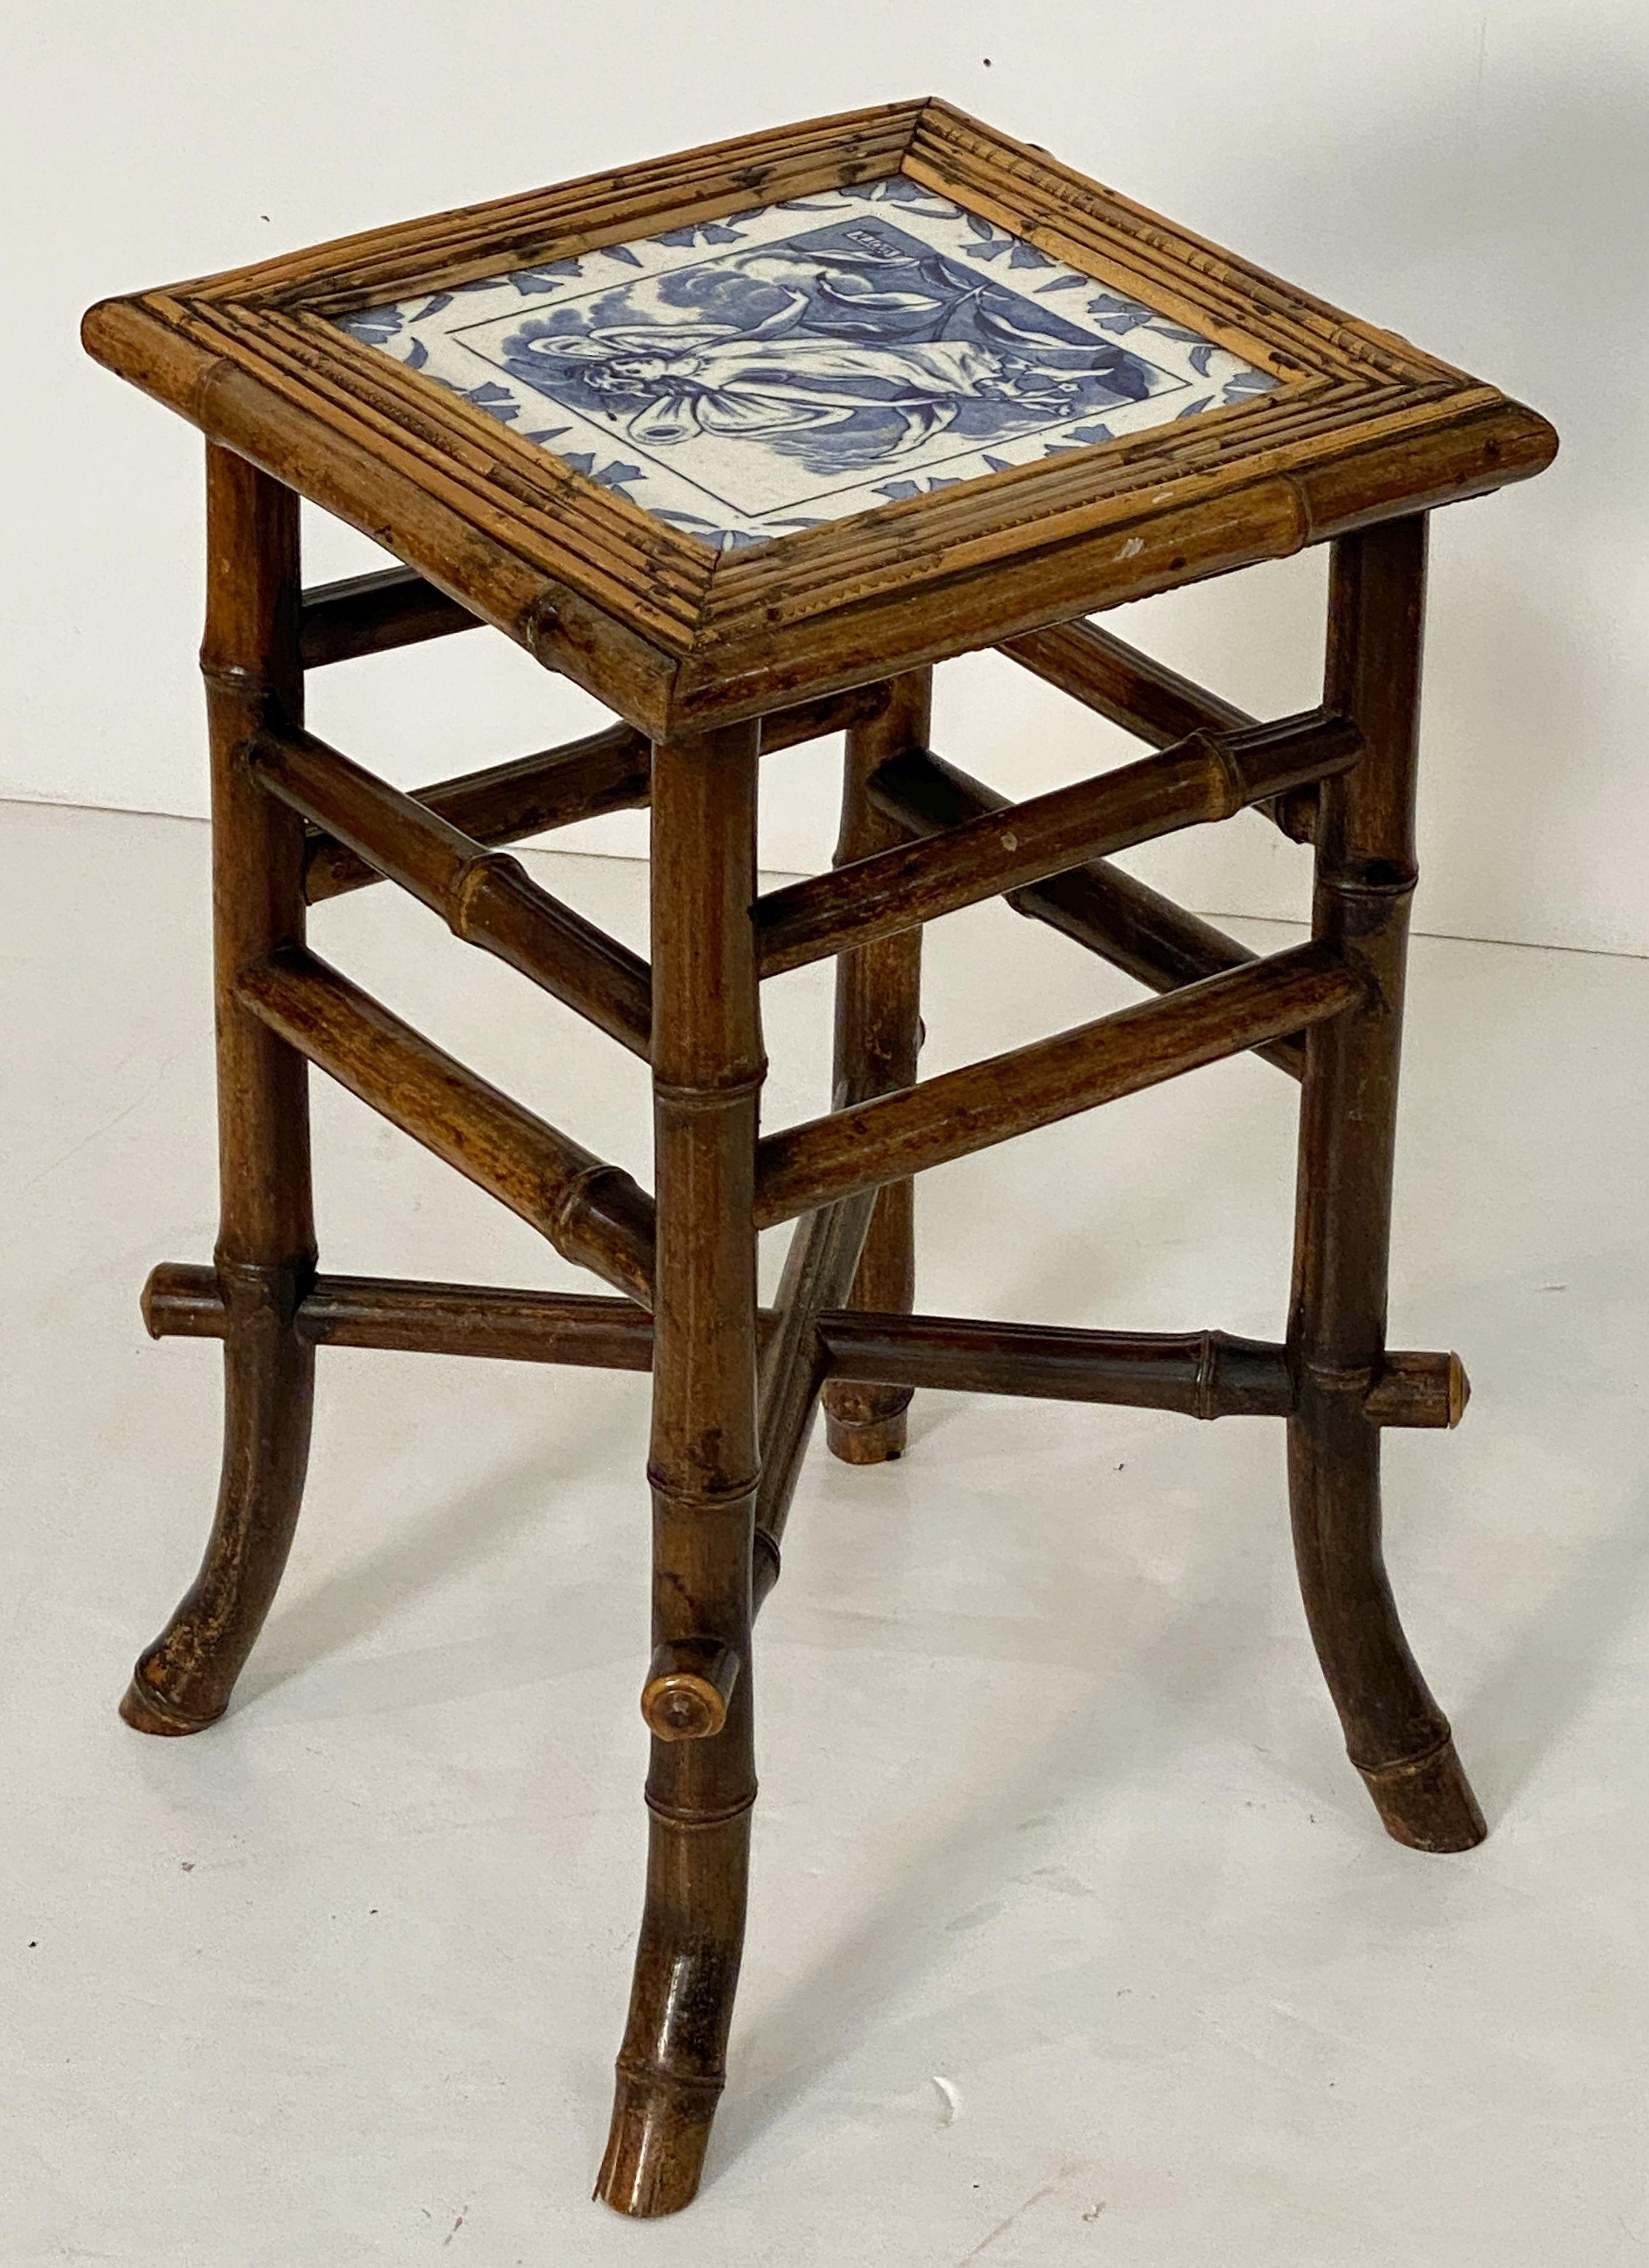 English Bamboo Table or Stool with Tile Seat from the Aesthetic Movement Era For Sale 4